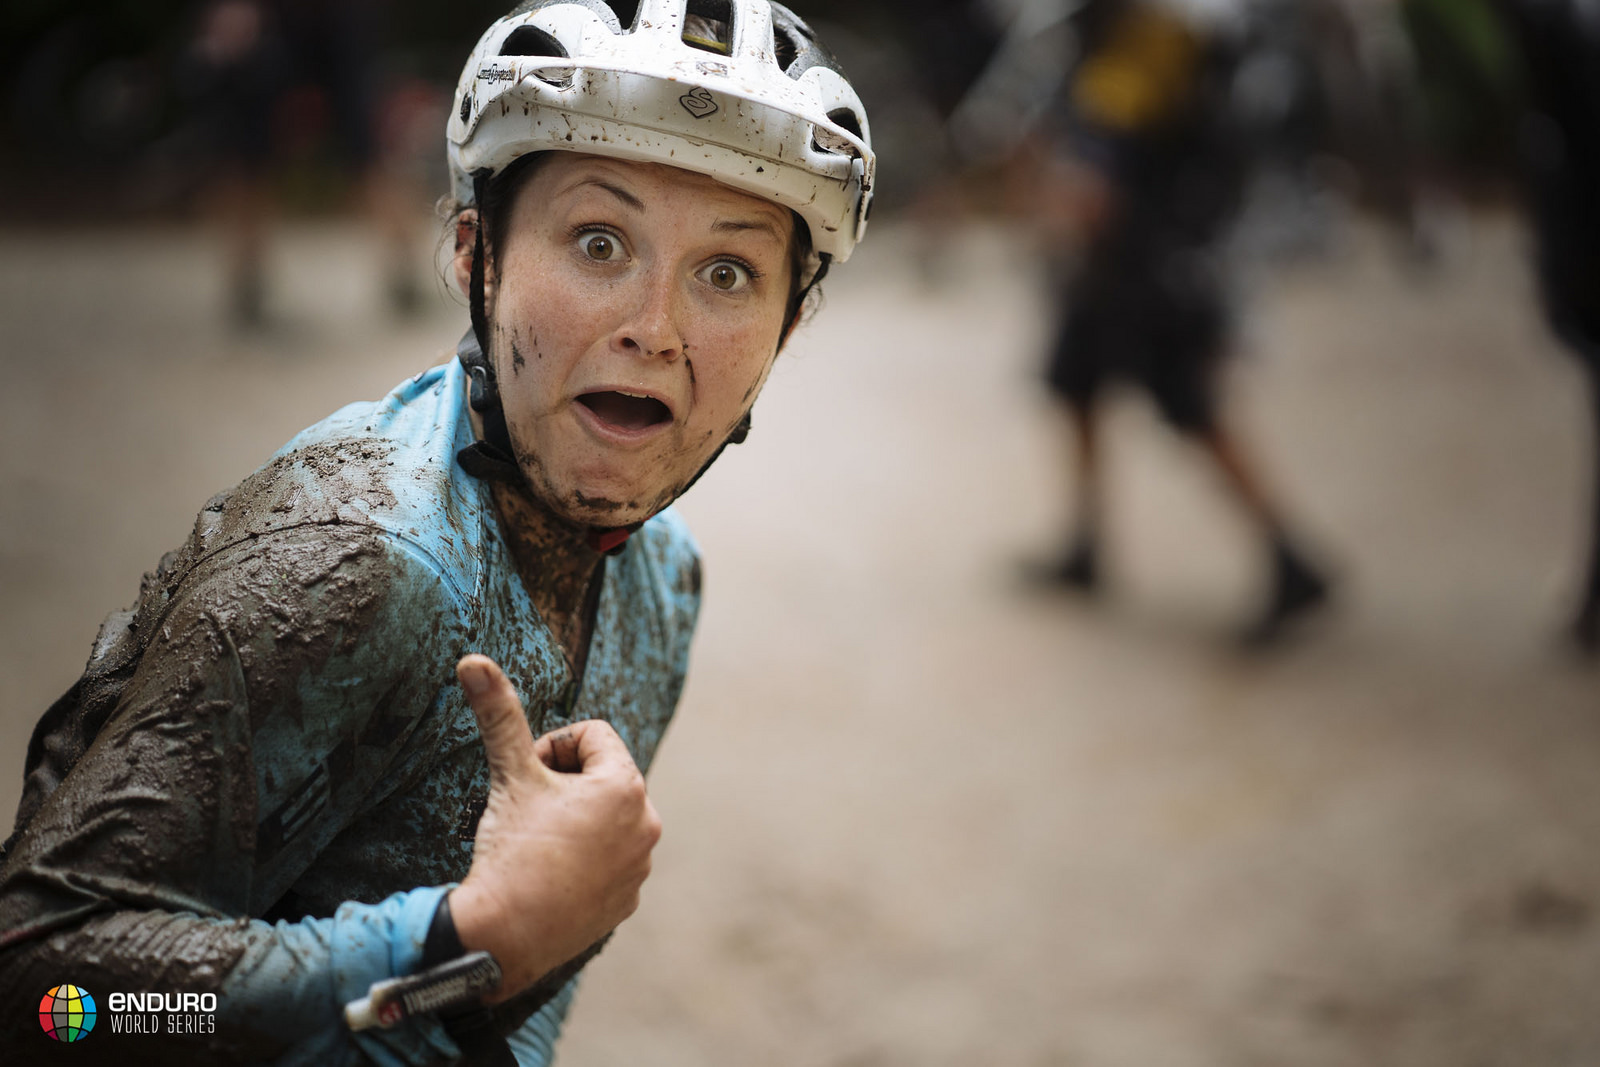 It was safe to say Katy Winton was stoked with her stage win and 5th place overall!